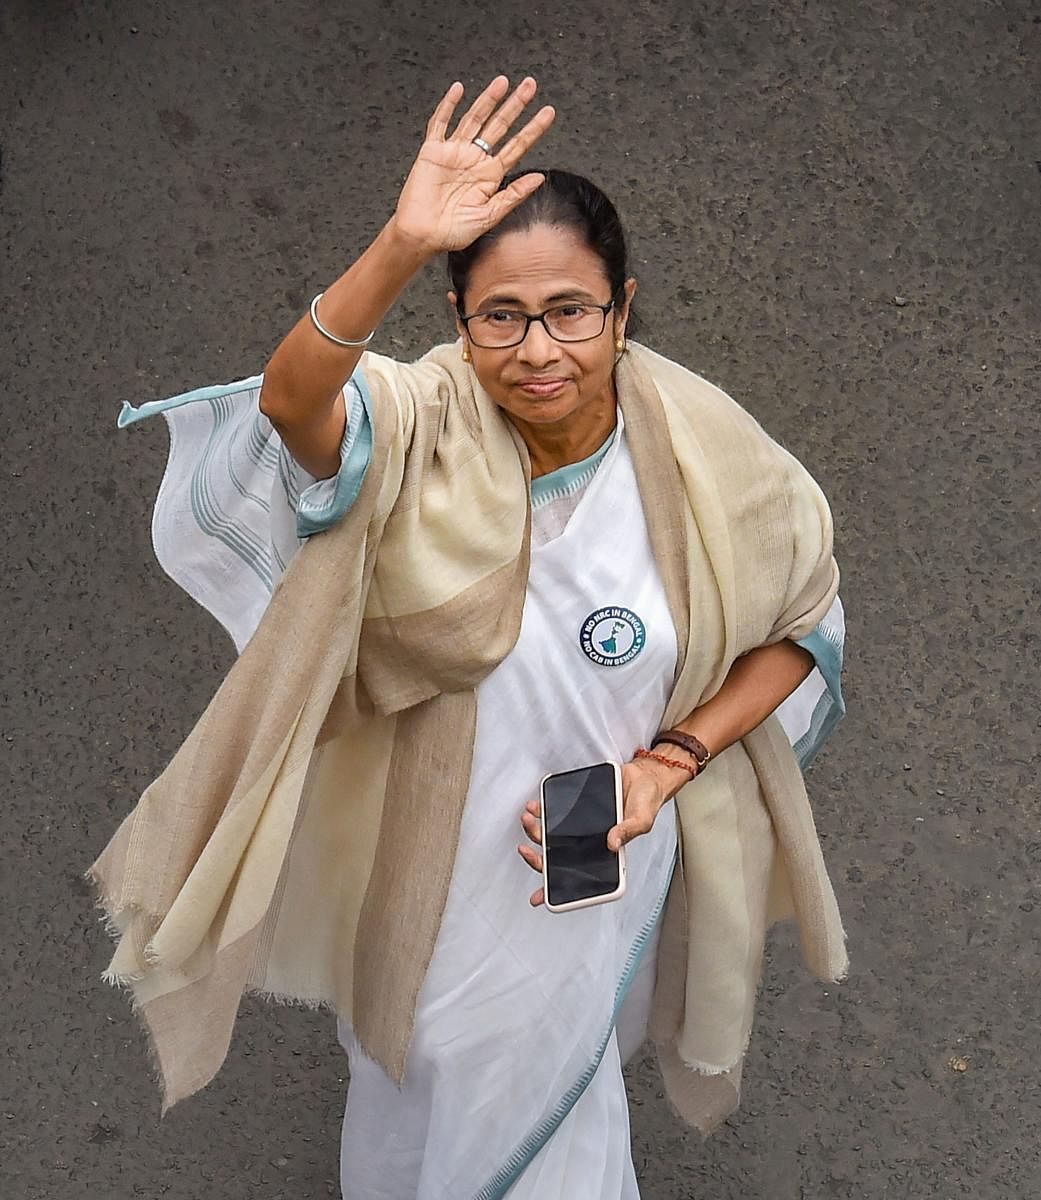 TMC Supremo and West Bengal Chief Minister Mamata Banerjee waves while leading a protest rally against the amended Citizenship Act and NRC, in Kolkata, Thursday, Dec. 26, 2019. (PTI Photo)